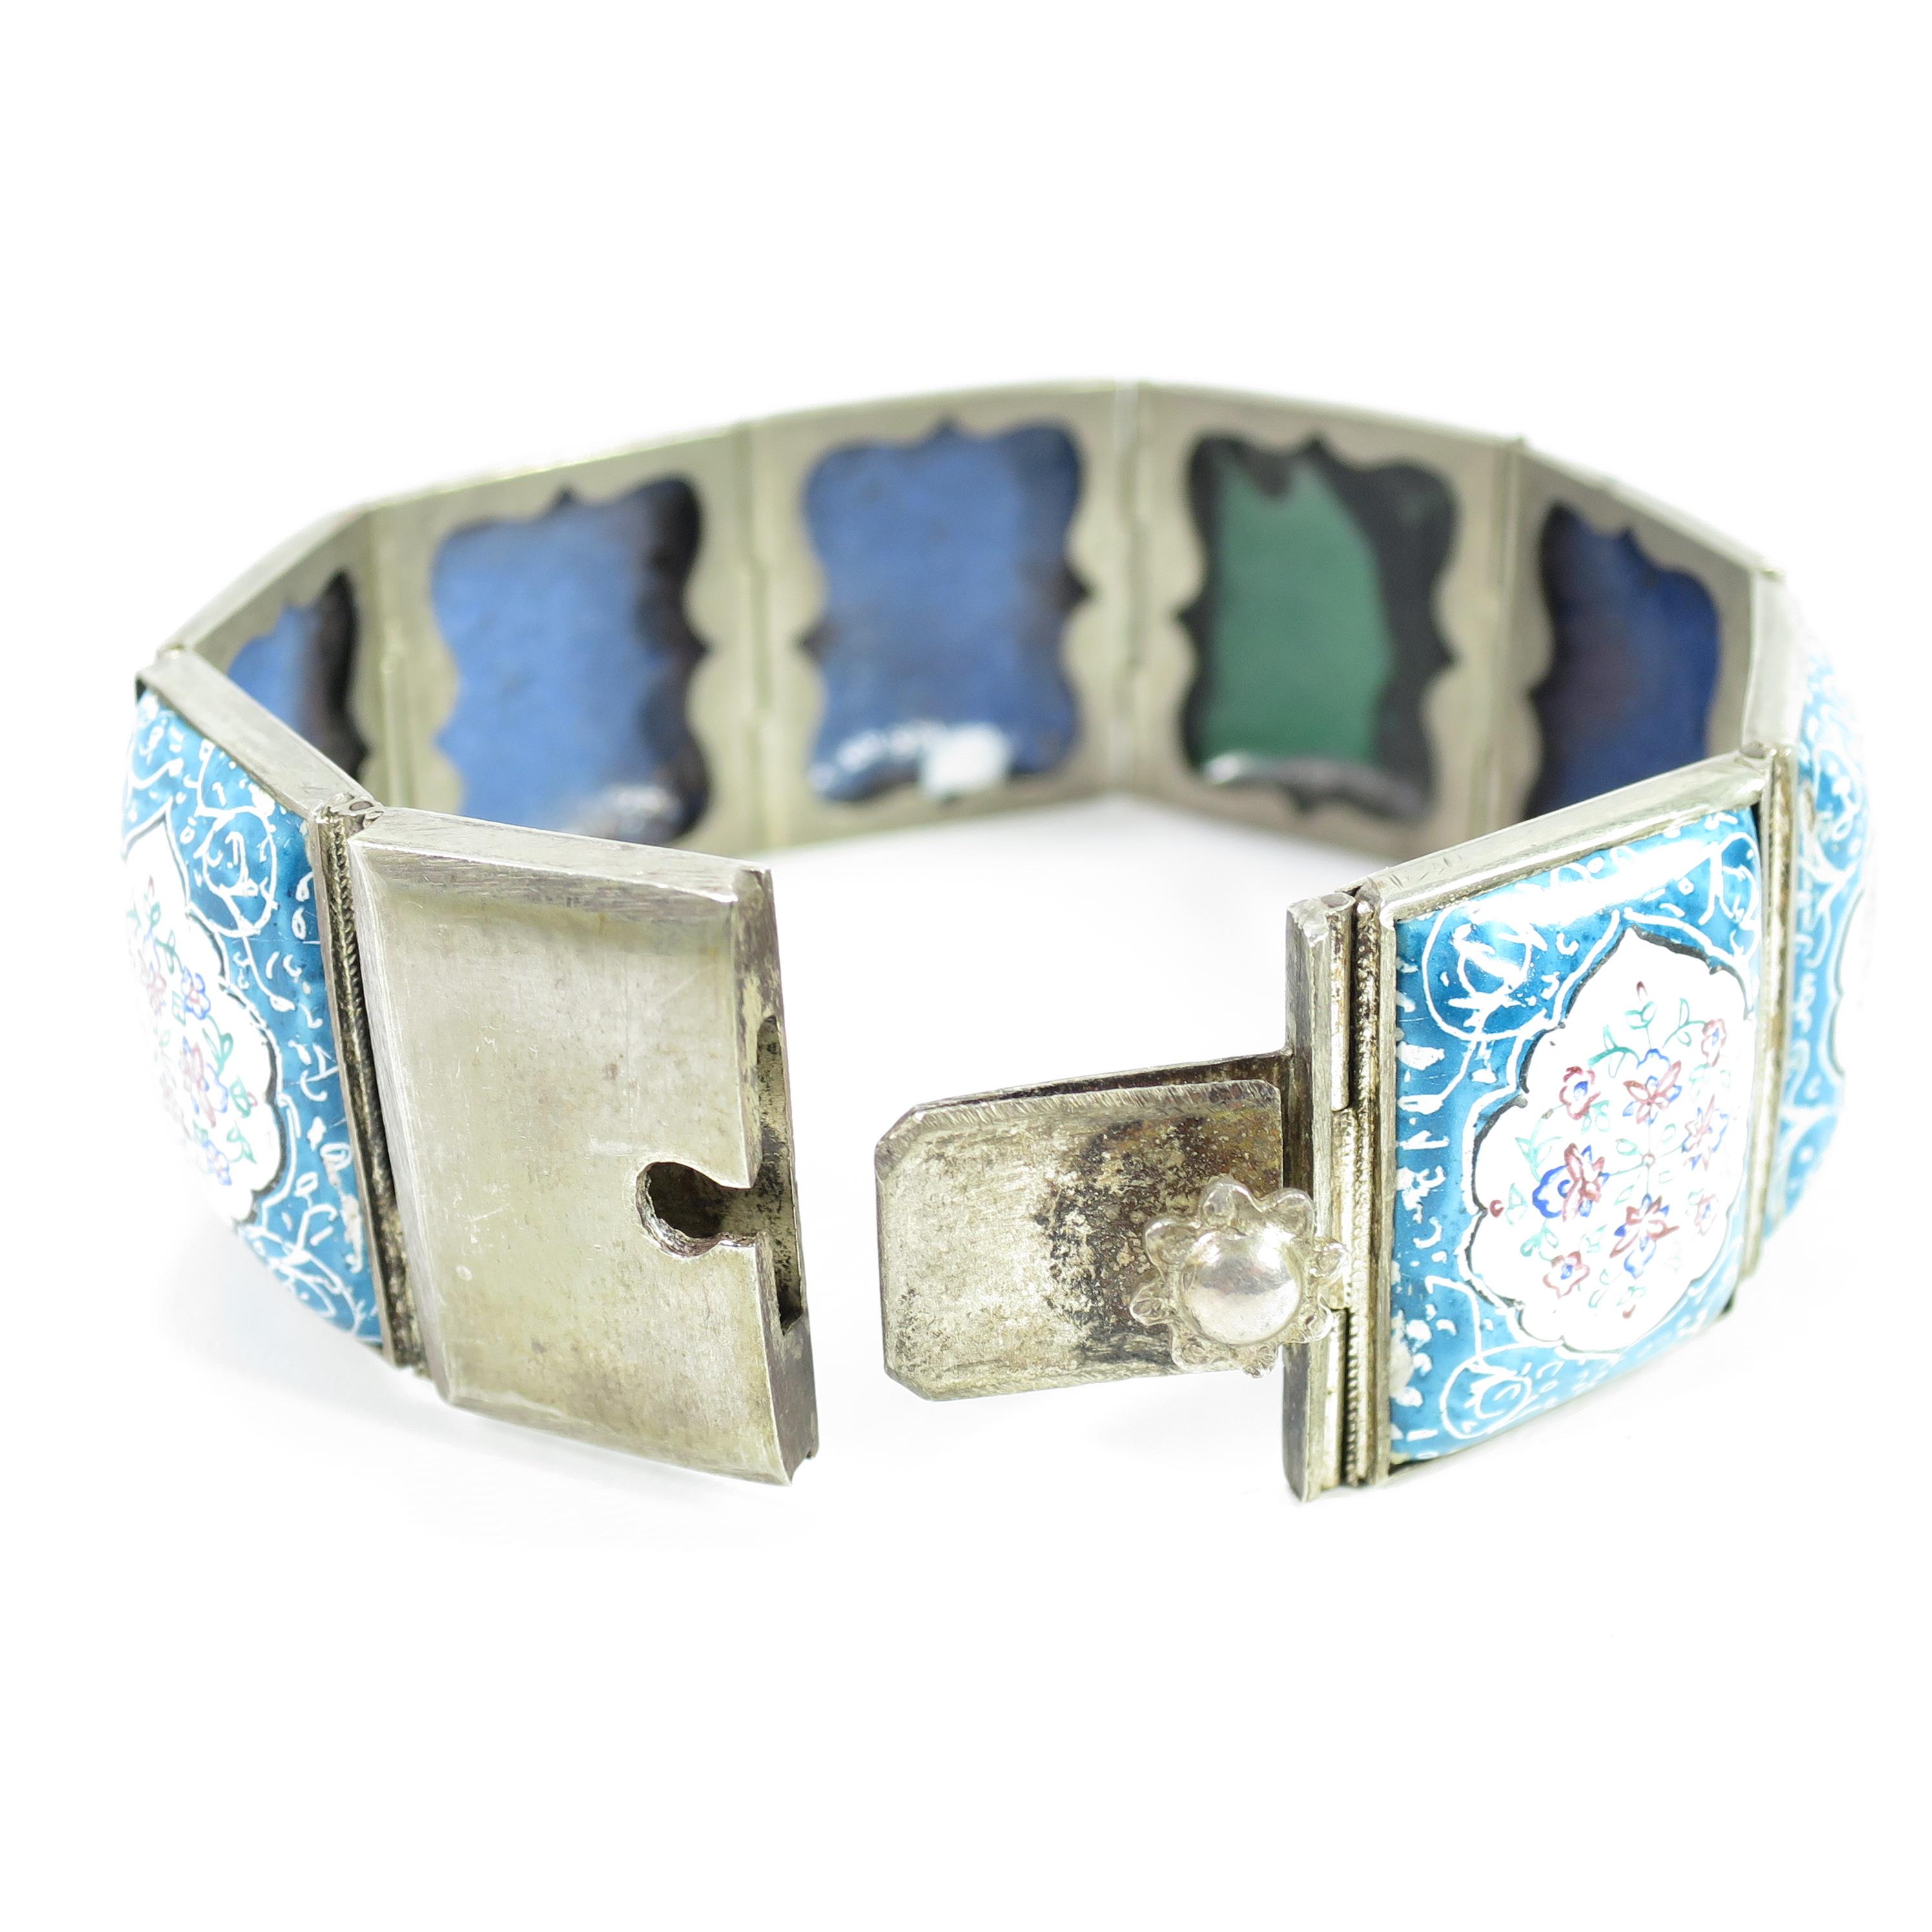 Persian Isfahan Silver Enamel Articulated Panel Bracelet, Artist-Signed 1930s For Sale 6